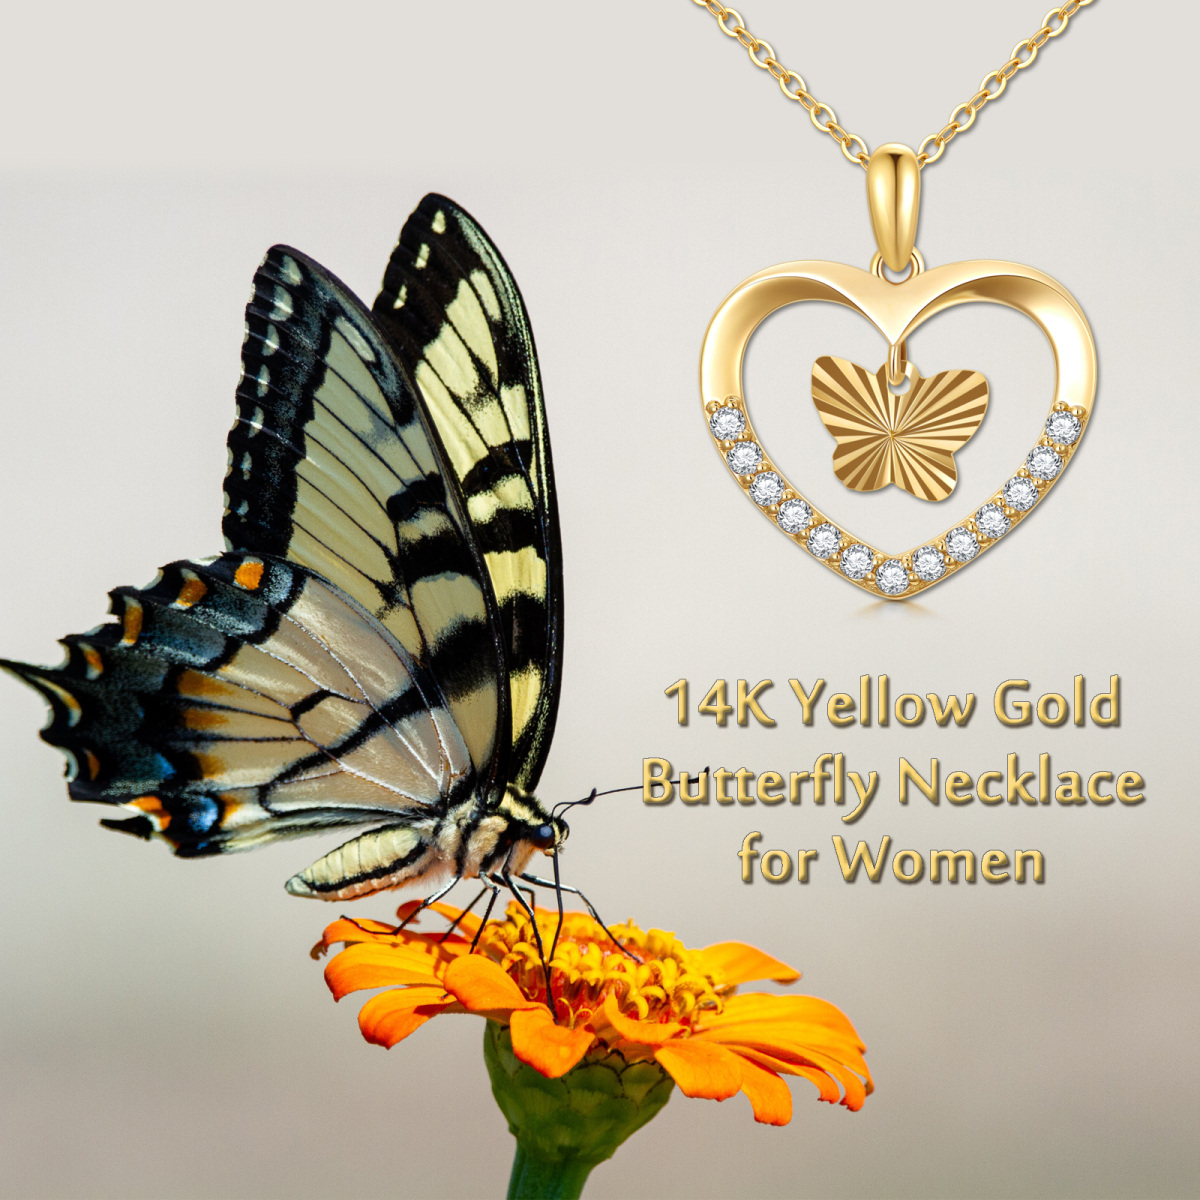 9K Gold Circular Shaped Moissanite Butterfly Pendant Necklace-6